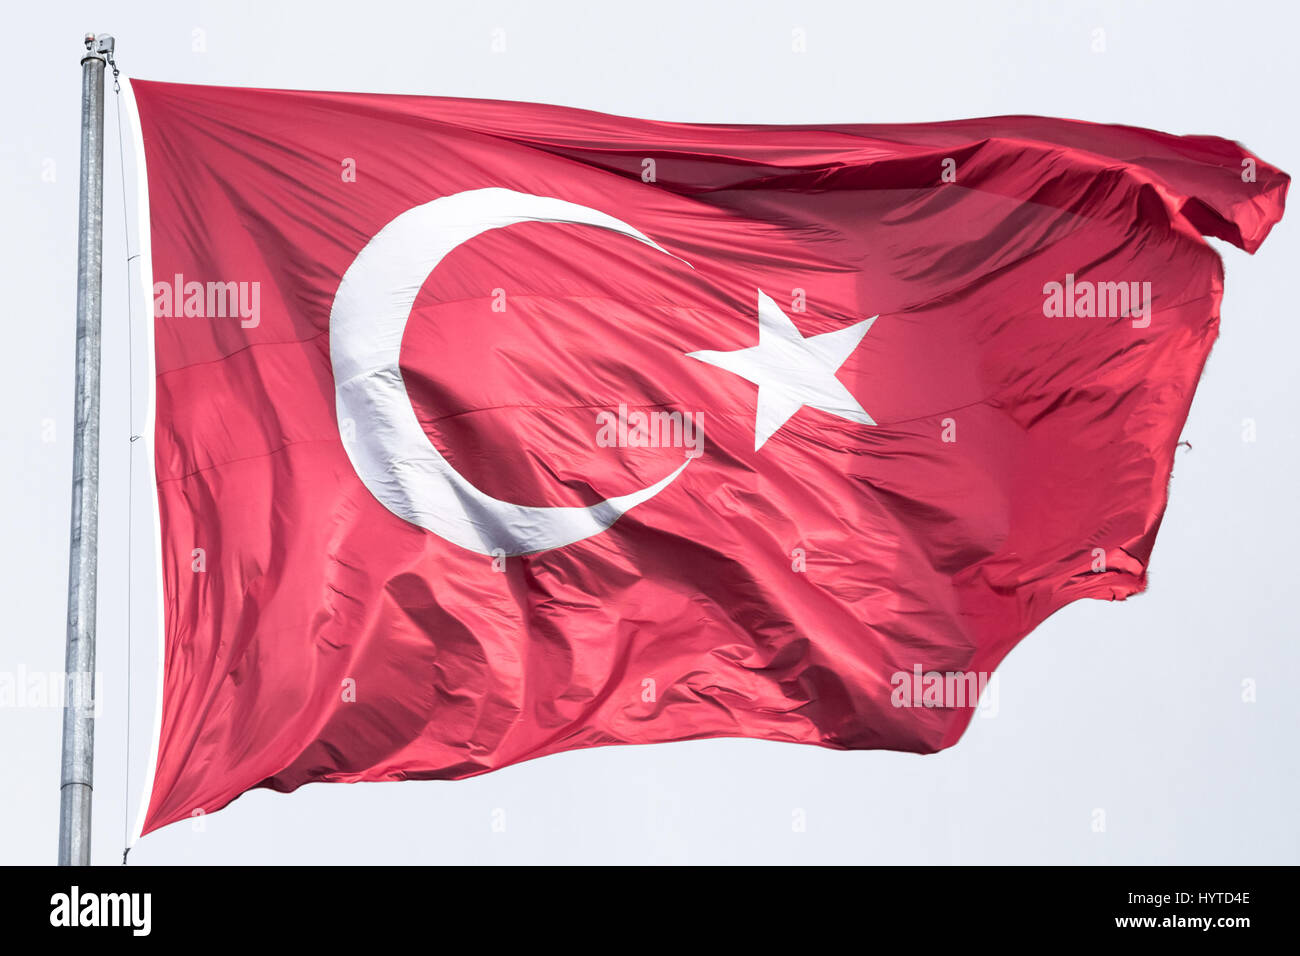 Turkish flag floating in the air  Picture of the official turkish flag hoisted in a windy environment Stock Photo